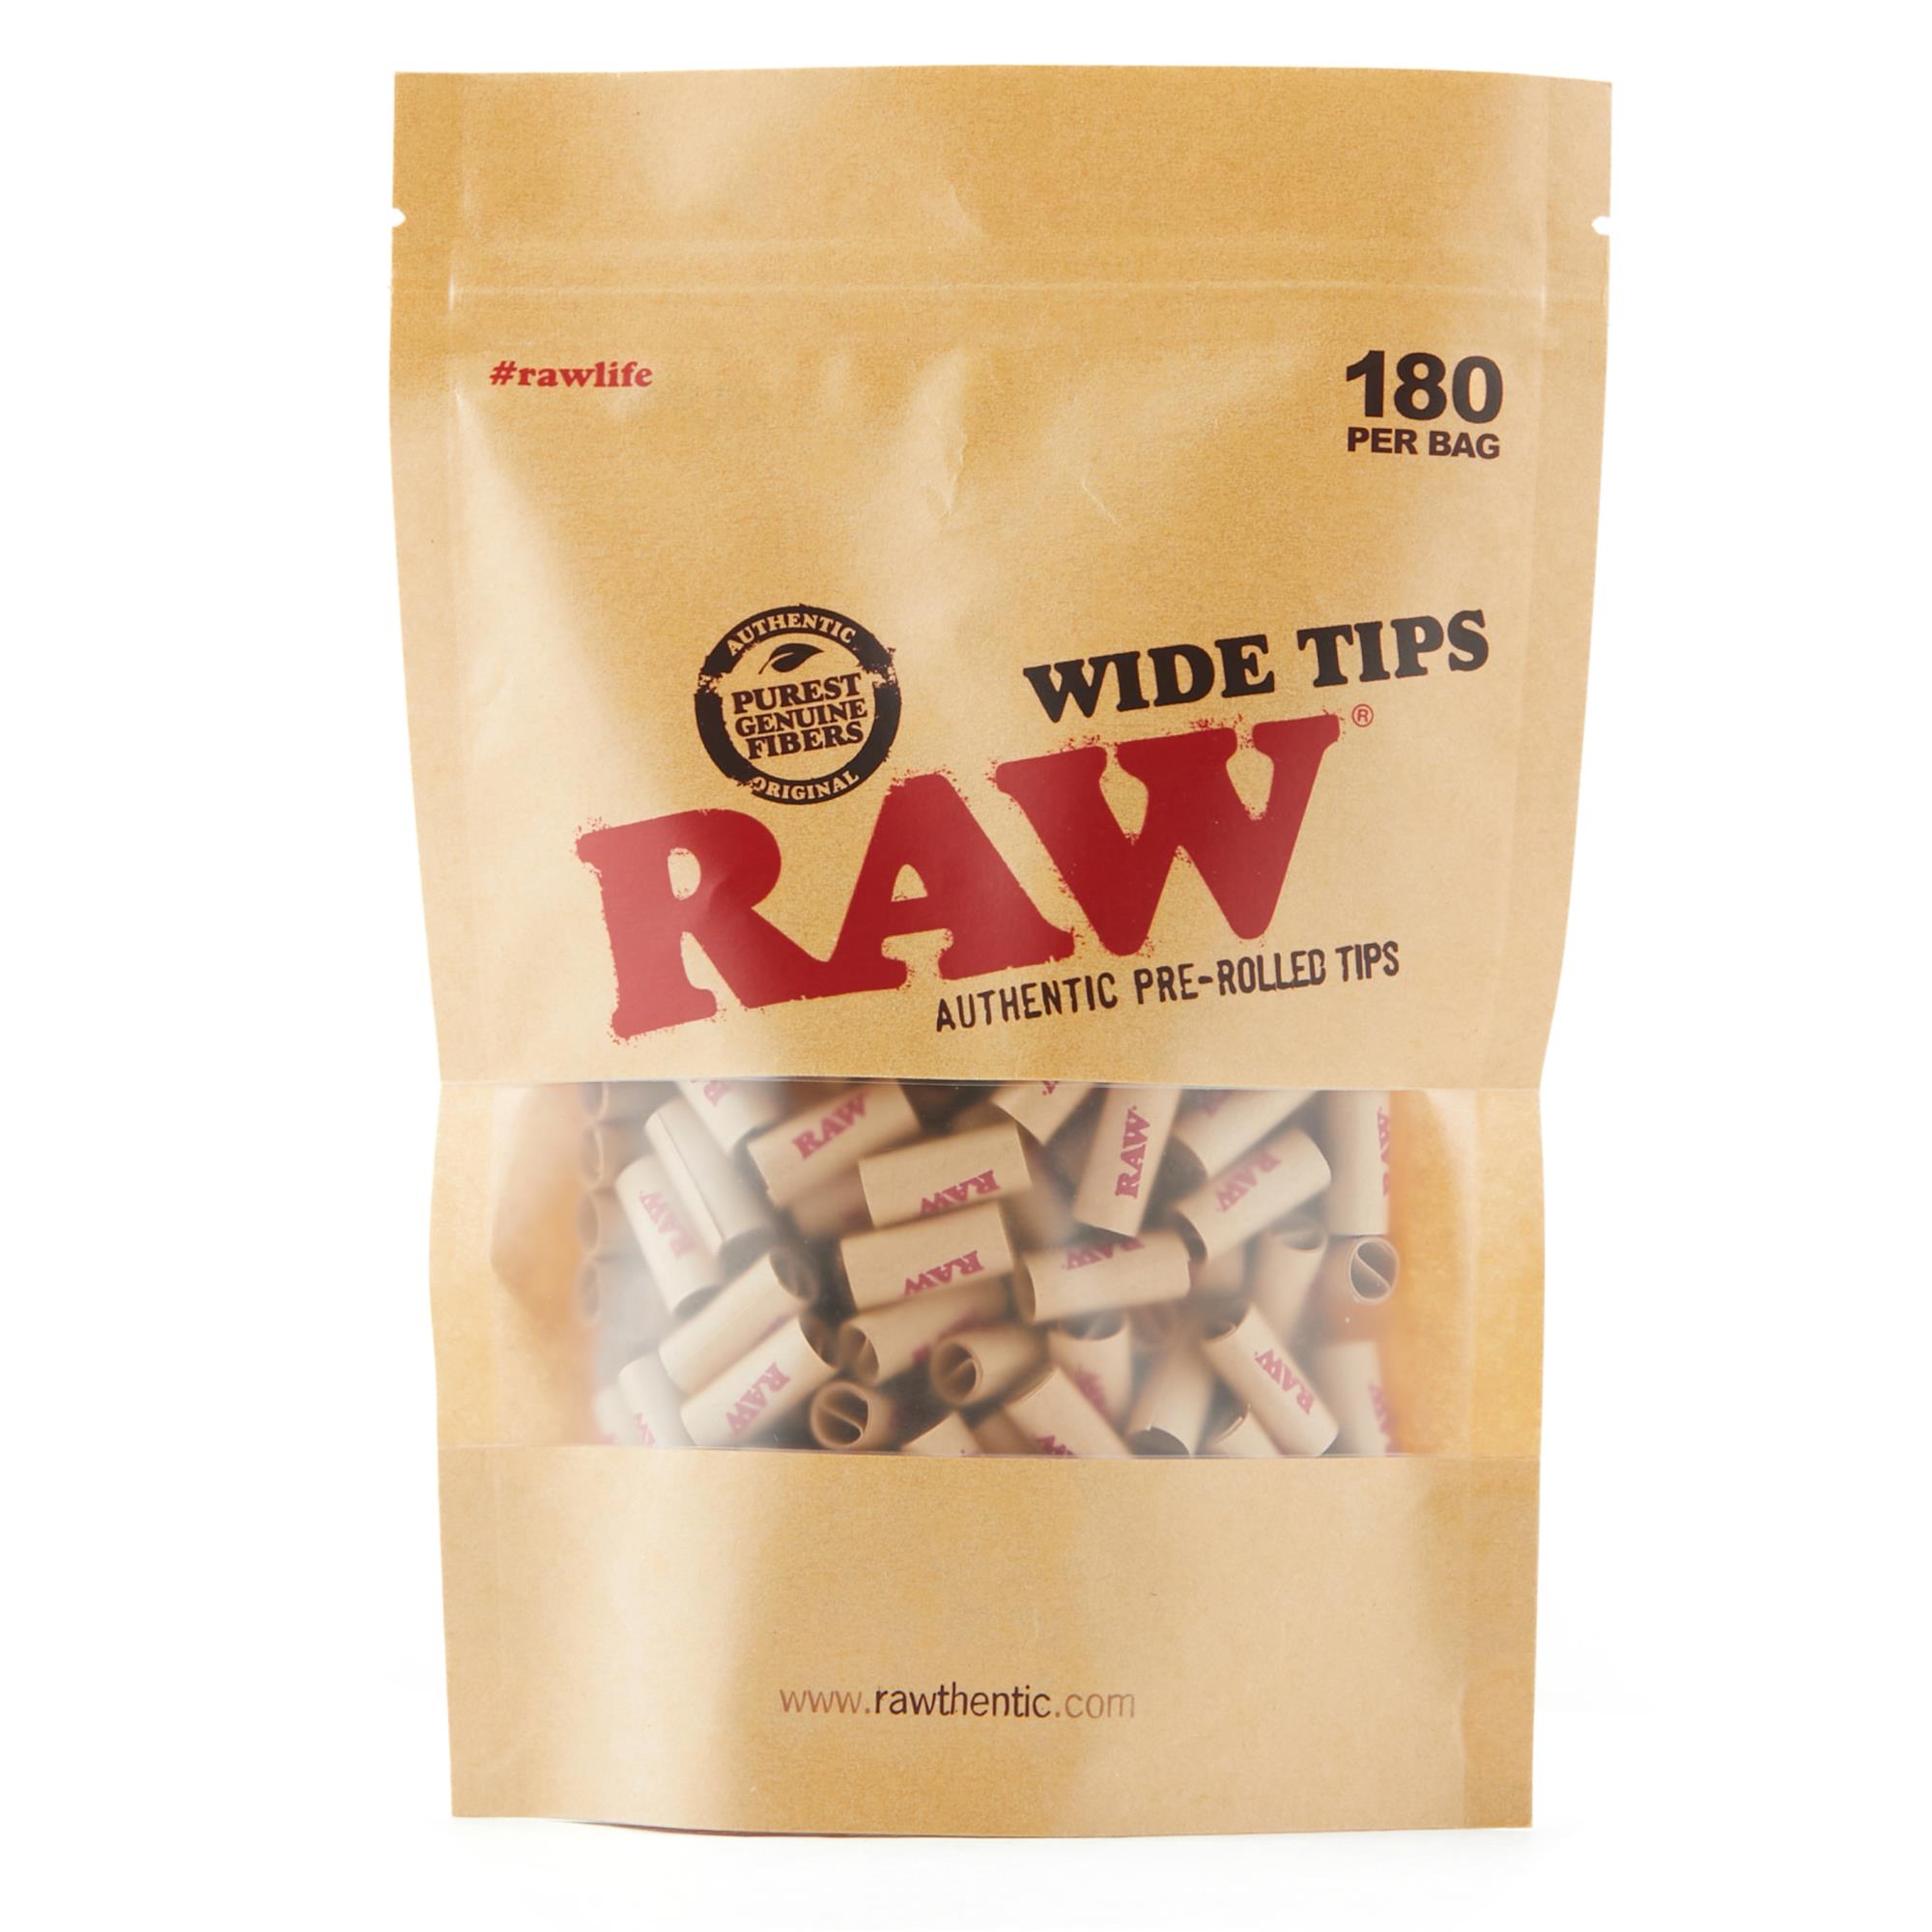 RAW PRE-ROLLED WIDE TIPS 180 BAG